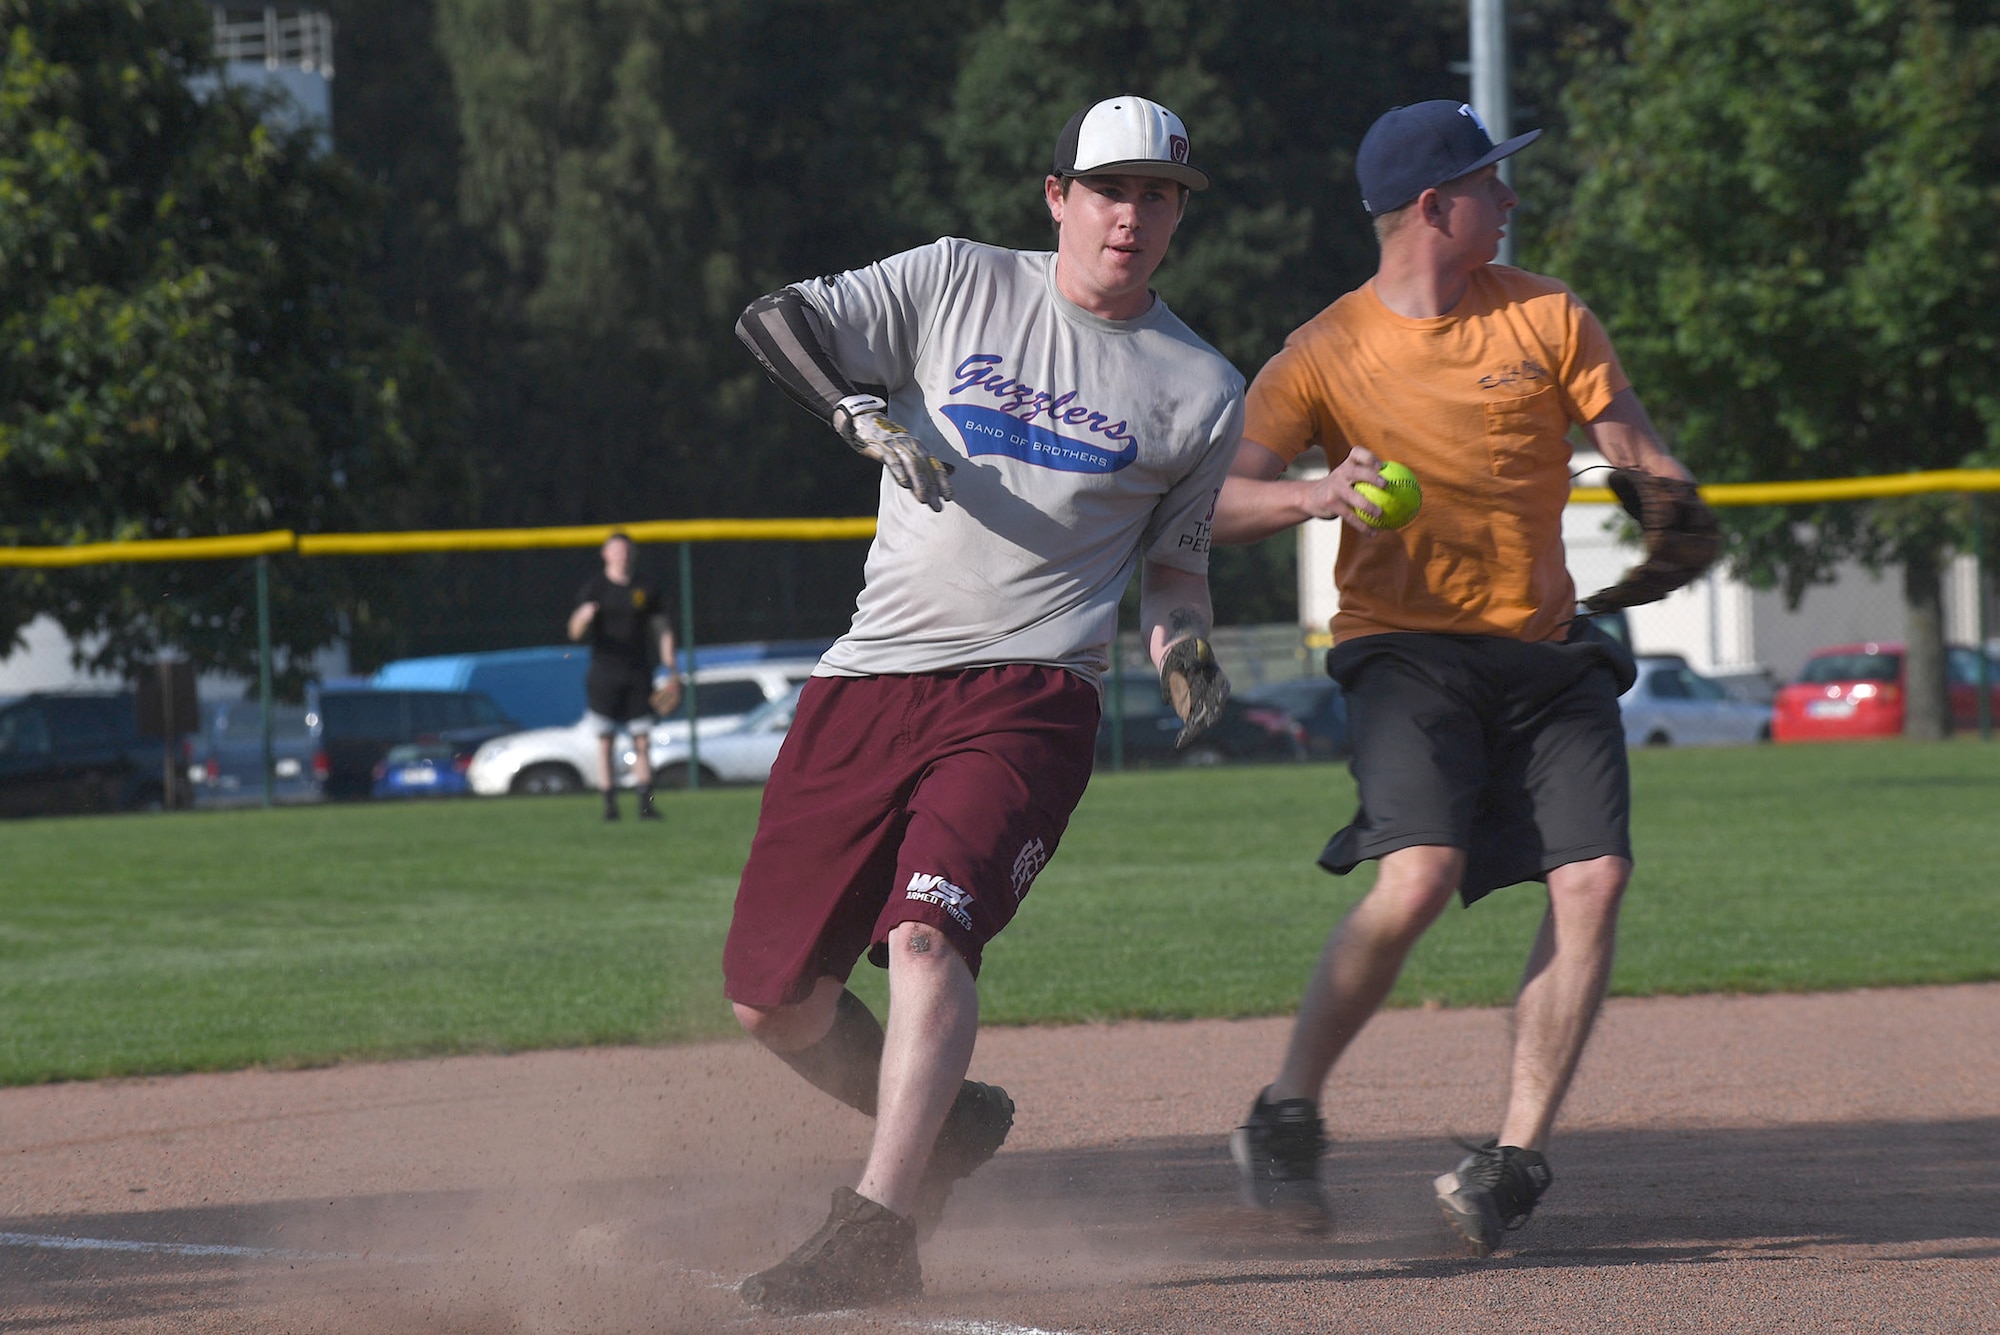 Kodie Bellew, 86th Maintenance Squadron softball player, makes it safely on a base during an intramural softball game Aug. 22, 2017, on Ramstein Air Base, Germany. Bellew played on the team as a dependent because his father works for the 86th MXS. (U.S. Air Force photo by Staff Sgt. Nesha Humes Stanton)